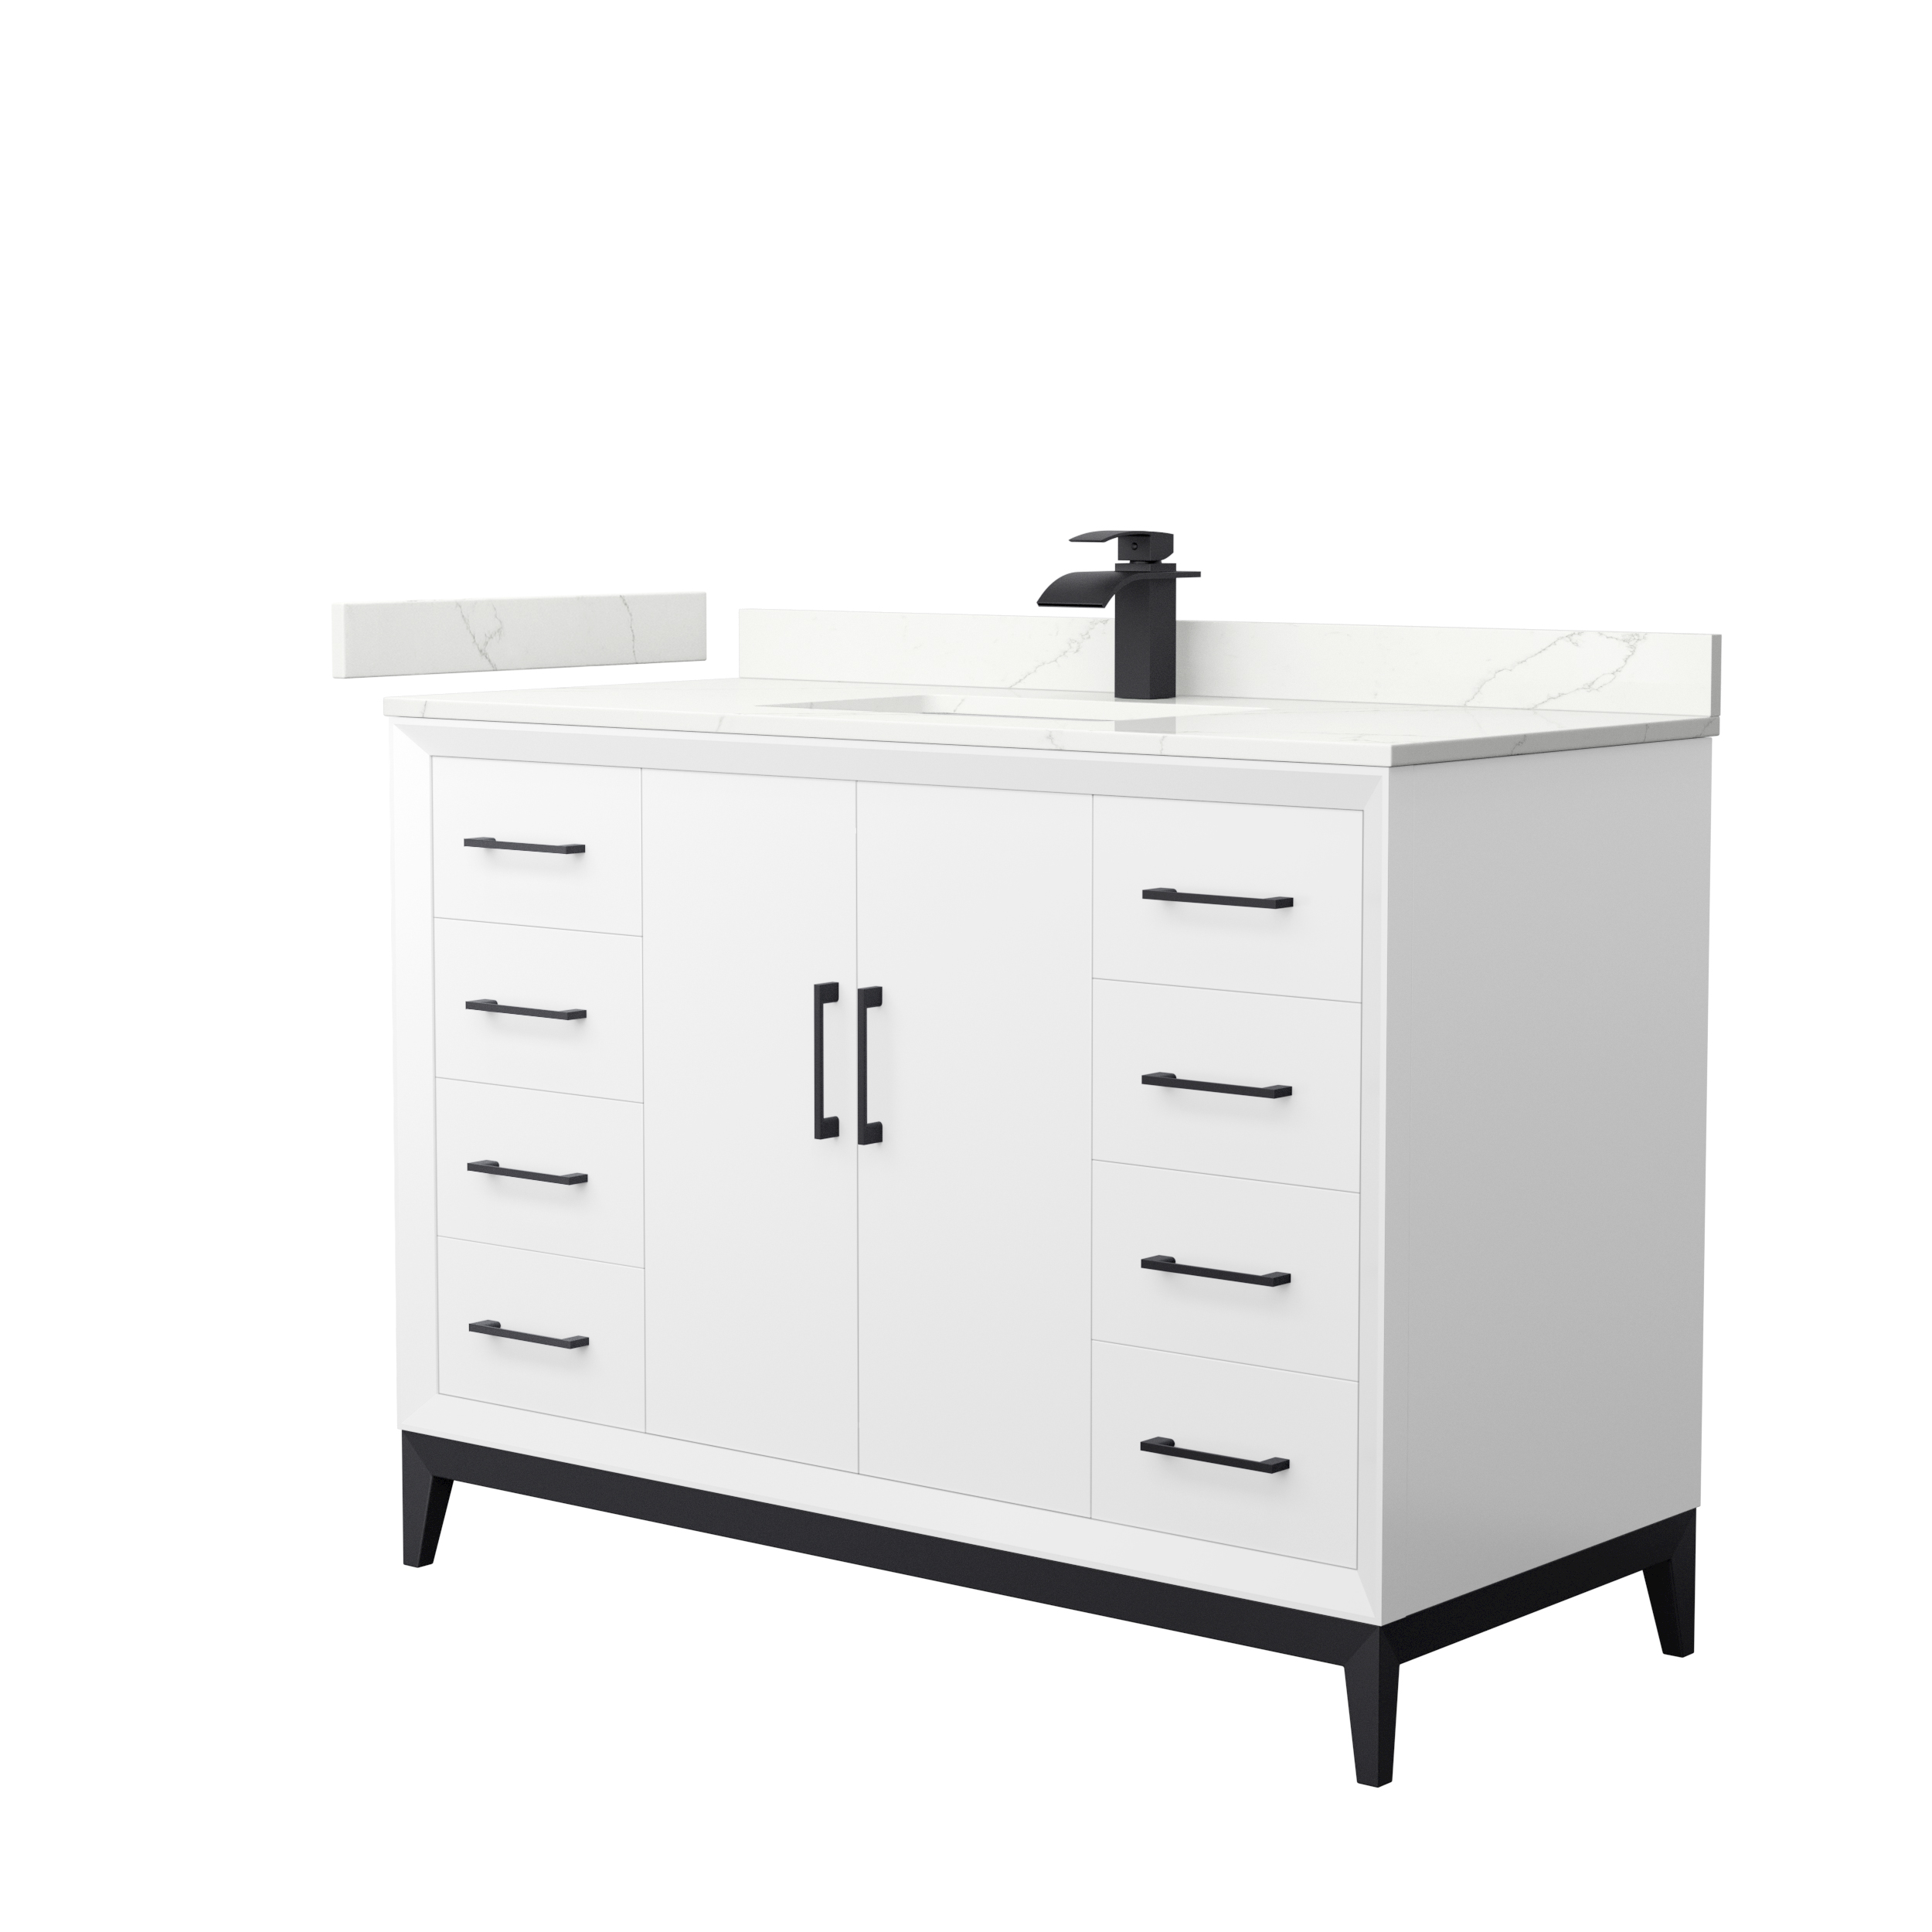 Amici 48" Single Vanity with optional Carrara Marble Counter - White WC-8181-48-SGL-VAN-WHT